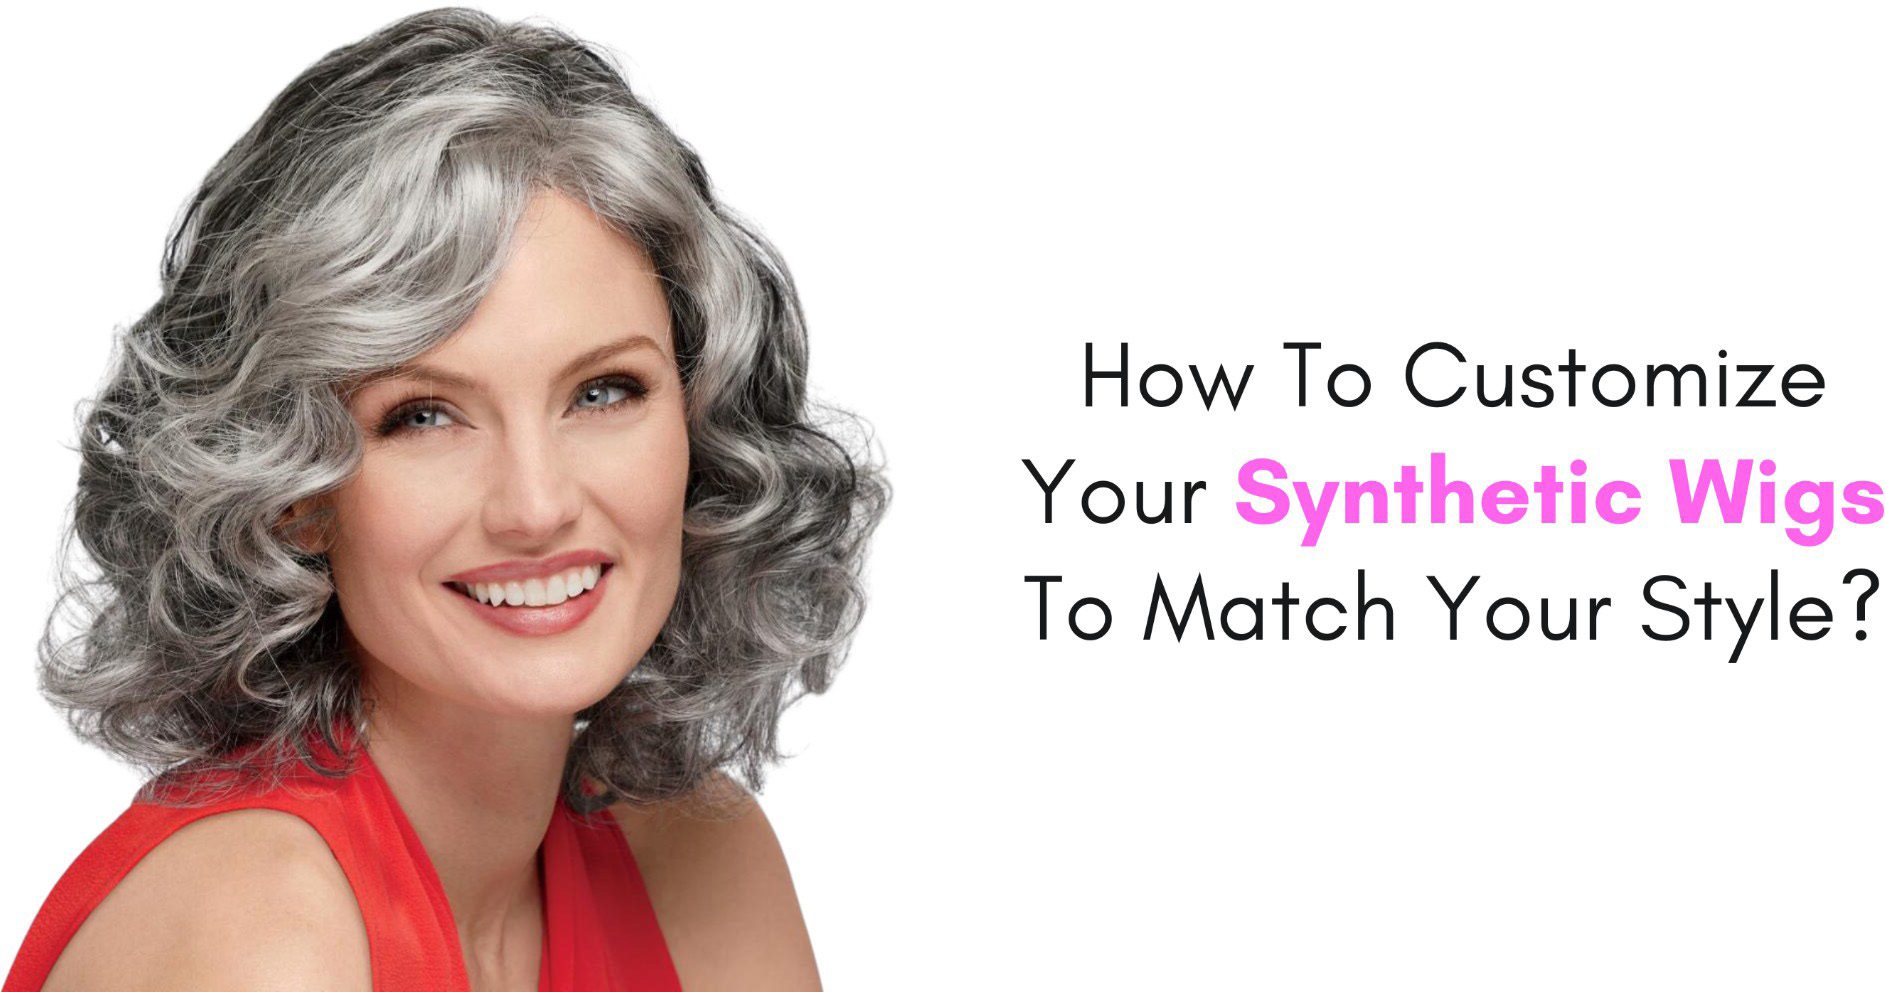 How To Customize Your Synthetic Wigs To Match Your Style?